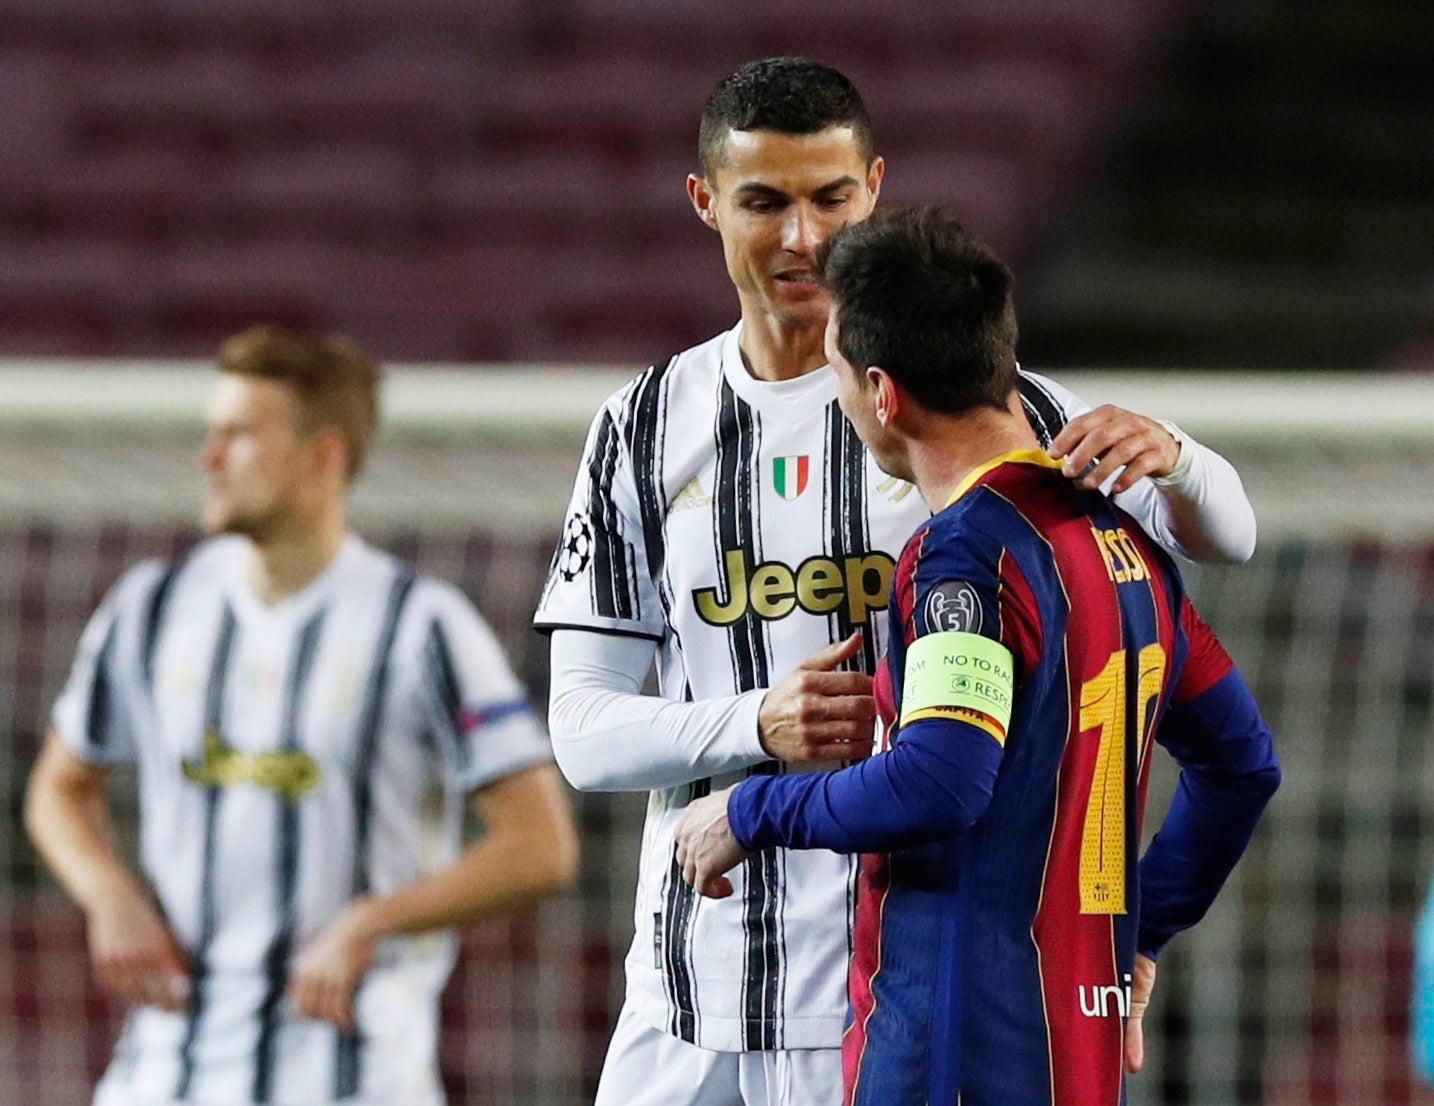 Lionel Messi: Why It's Difficult For Cristiano Ronaldo And I To Be